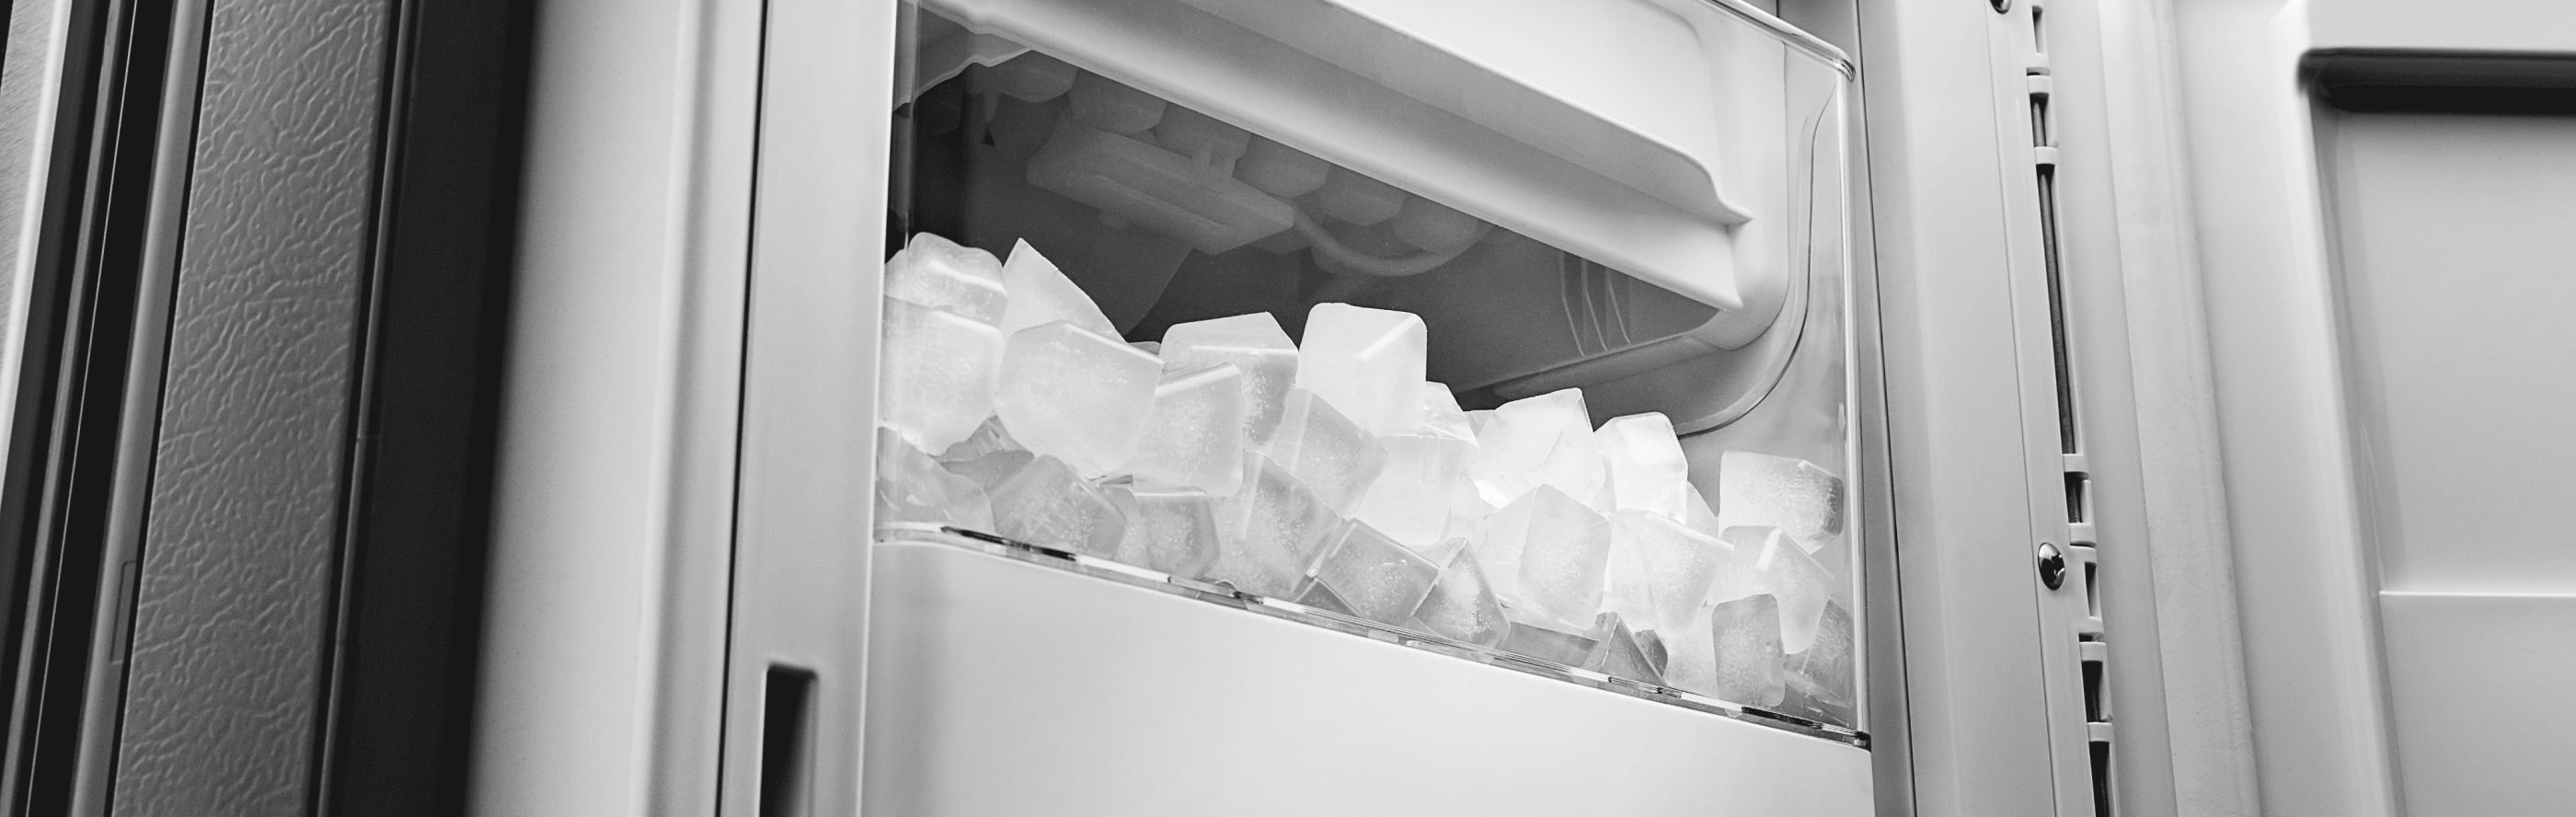 Close-up of a full, in-door ice maker